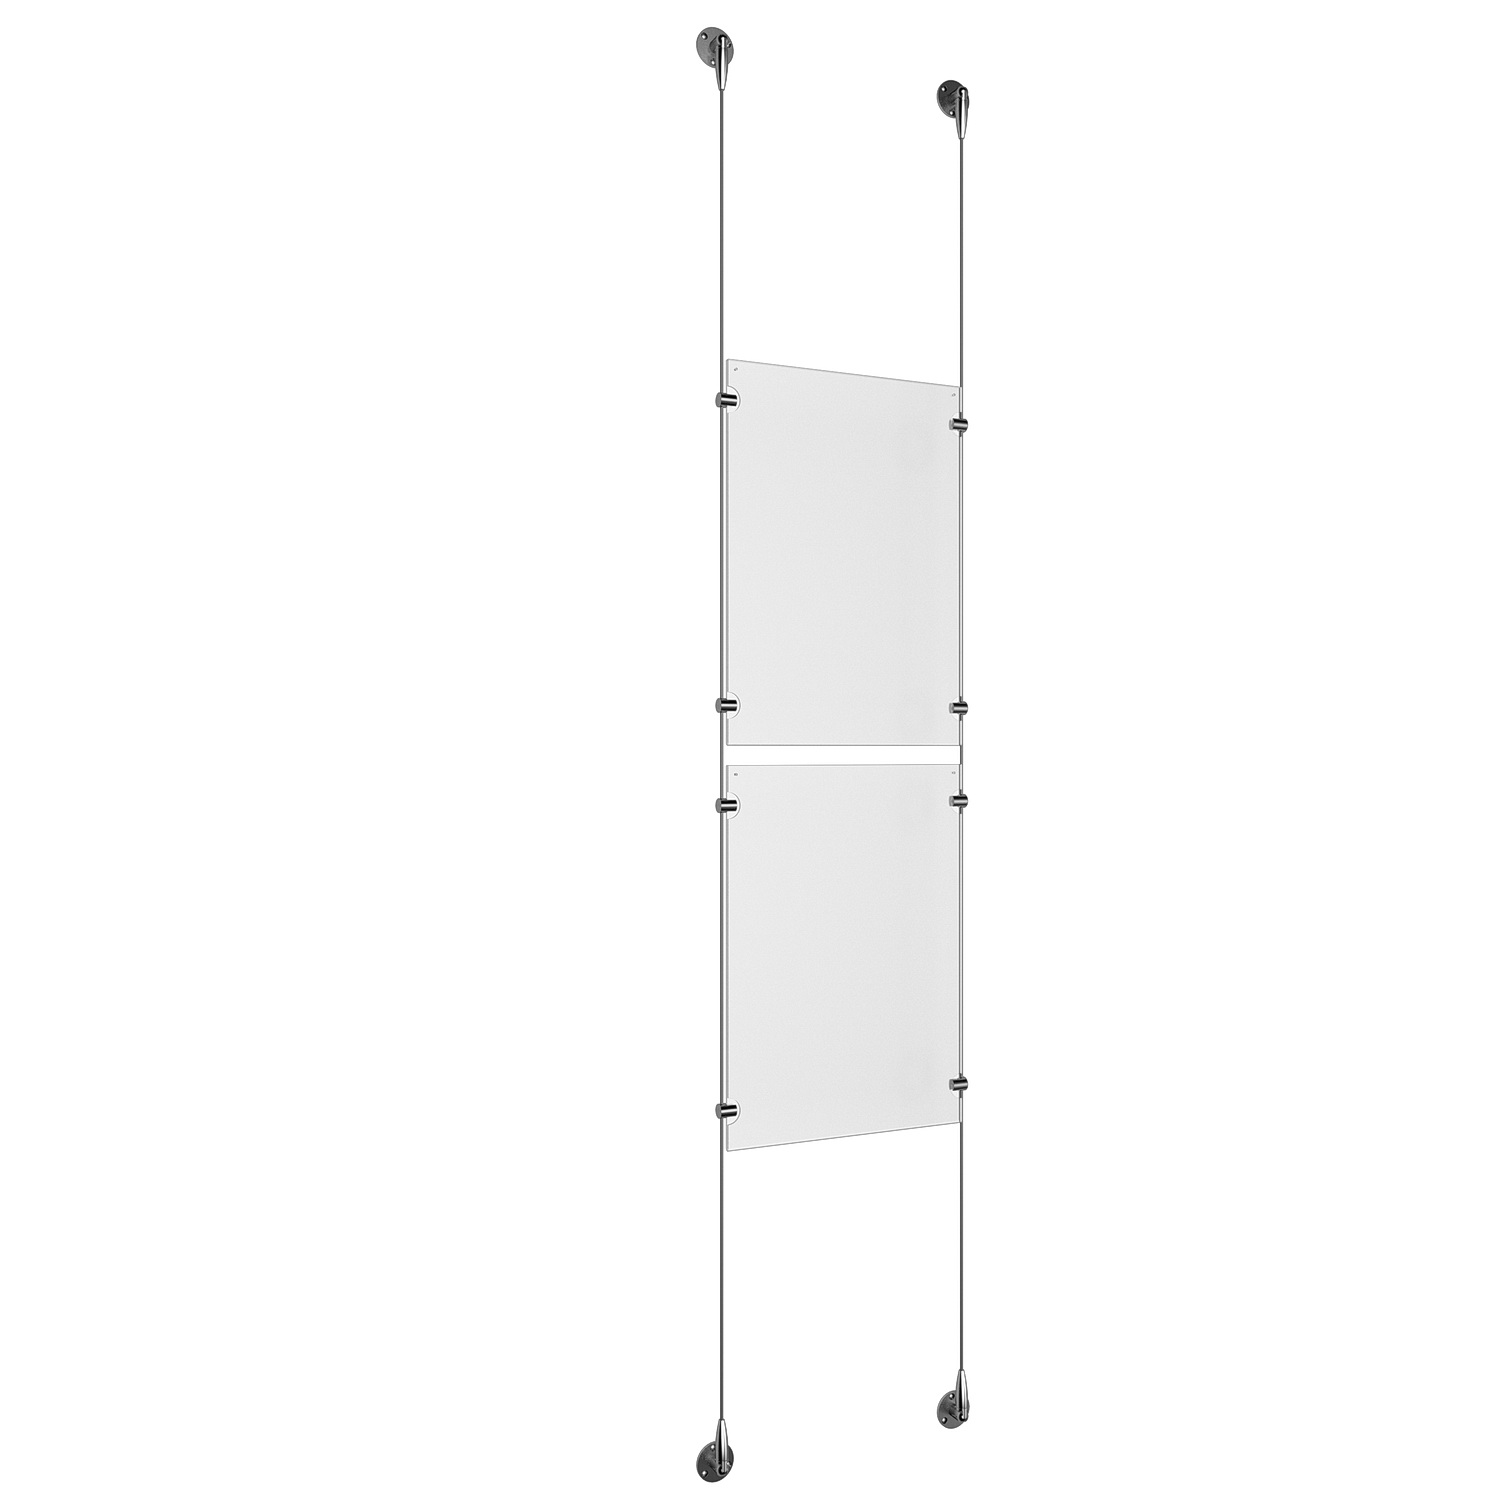 (2) 11'' Width x 17'' Height Clear Acrylic Frame & (2) Stainless Steel Satin Brushed Adjustable Angle Signature 1/8'' Cable Systems with (8) Single-Sided Panel Grippers